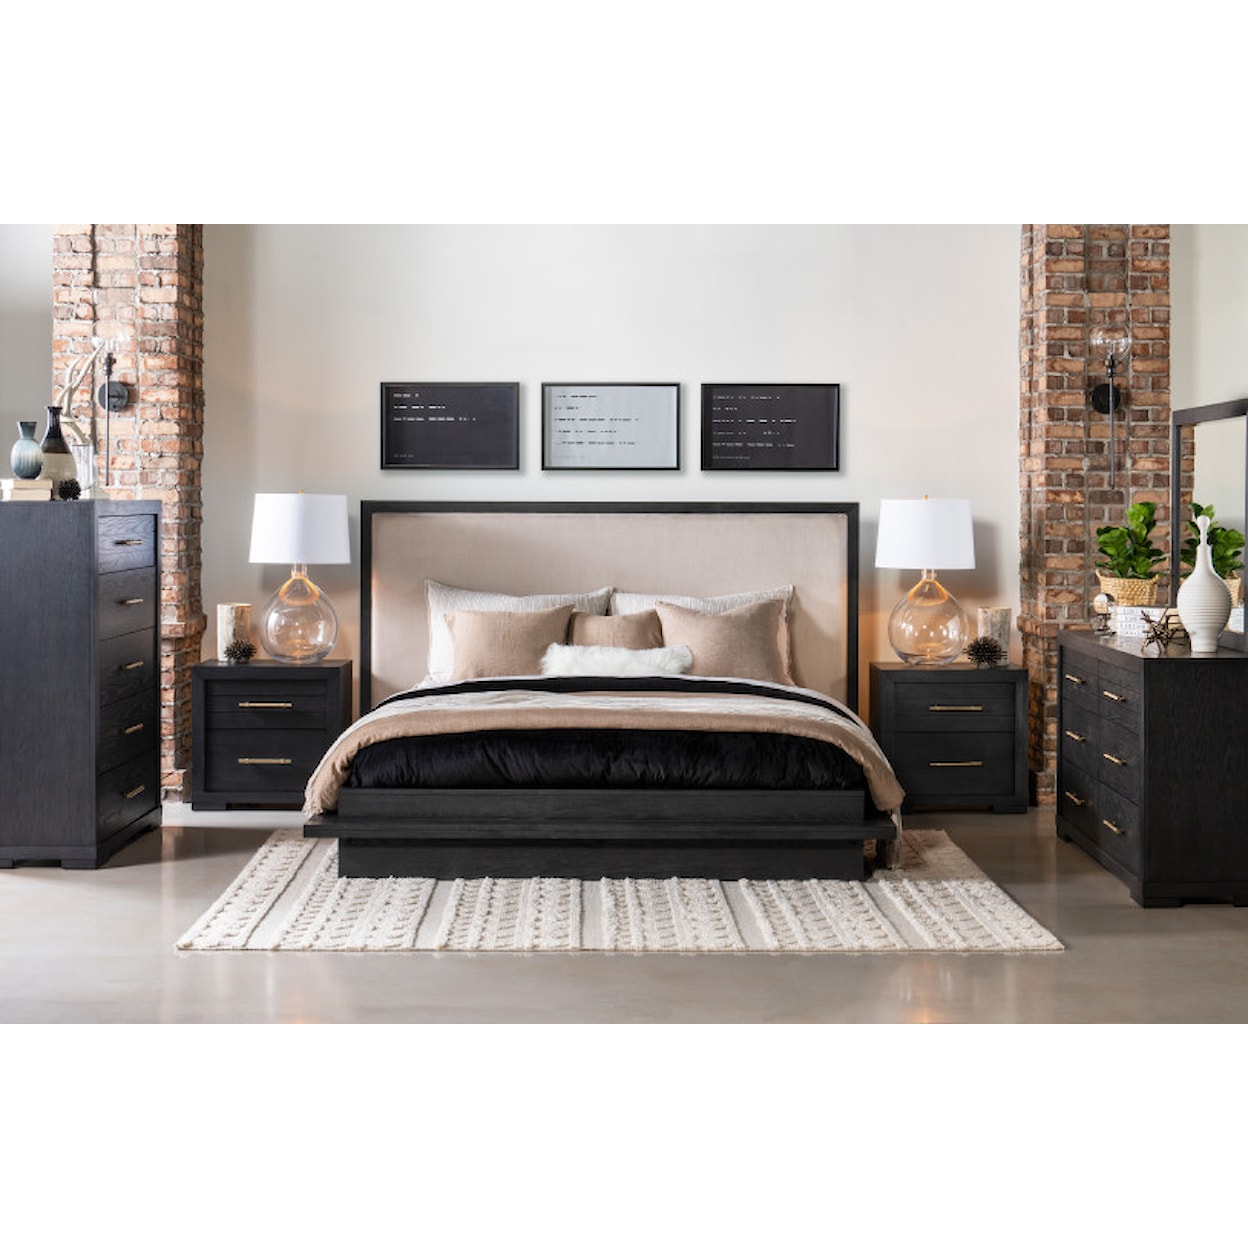 Legacy Classic Westwood King Bedroom Group